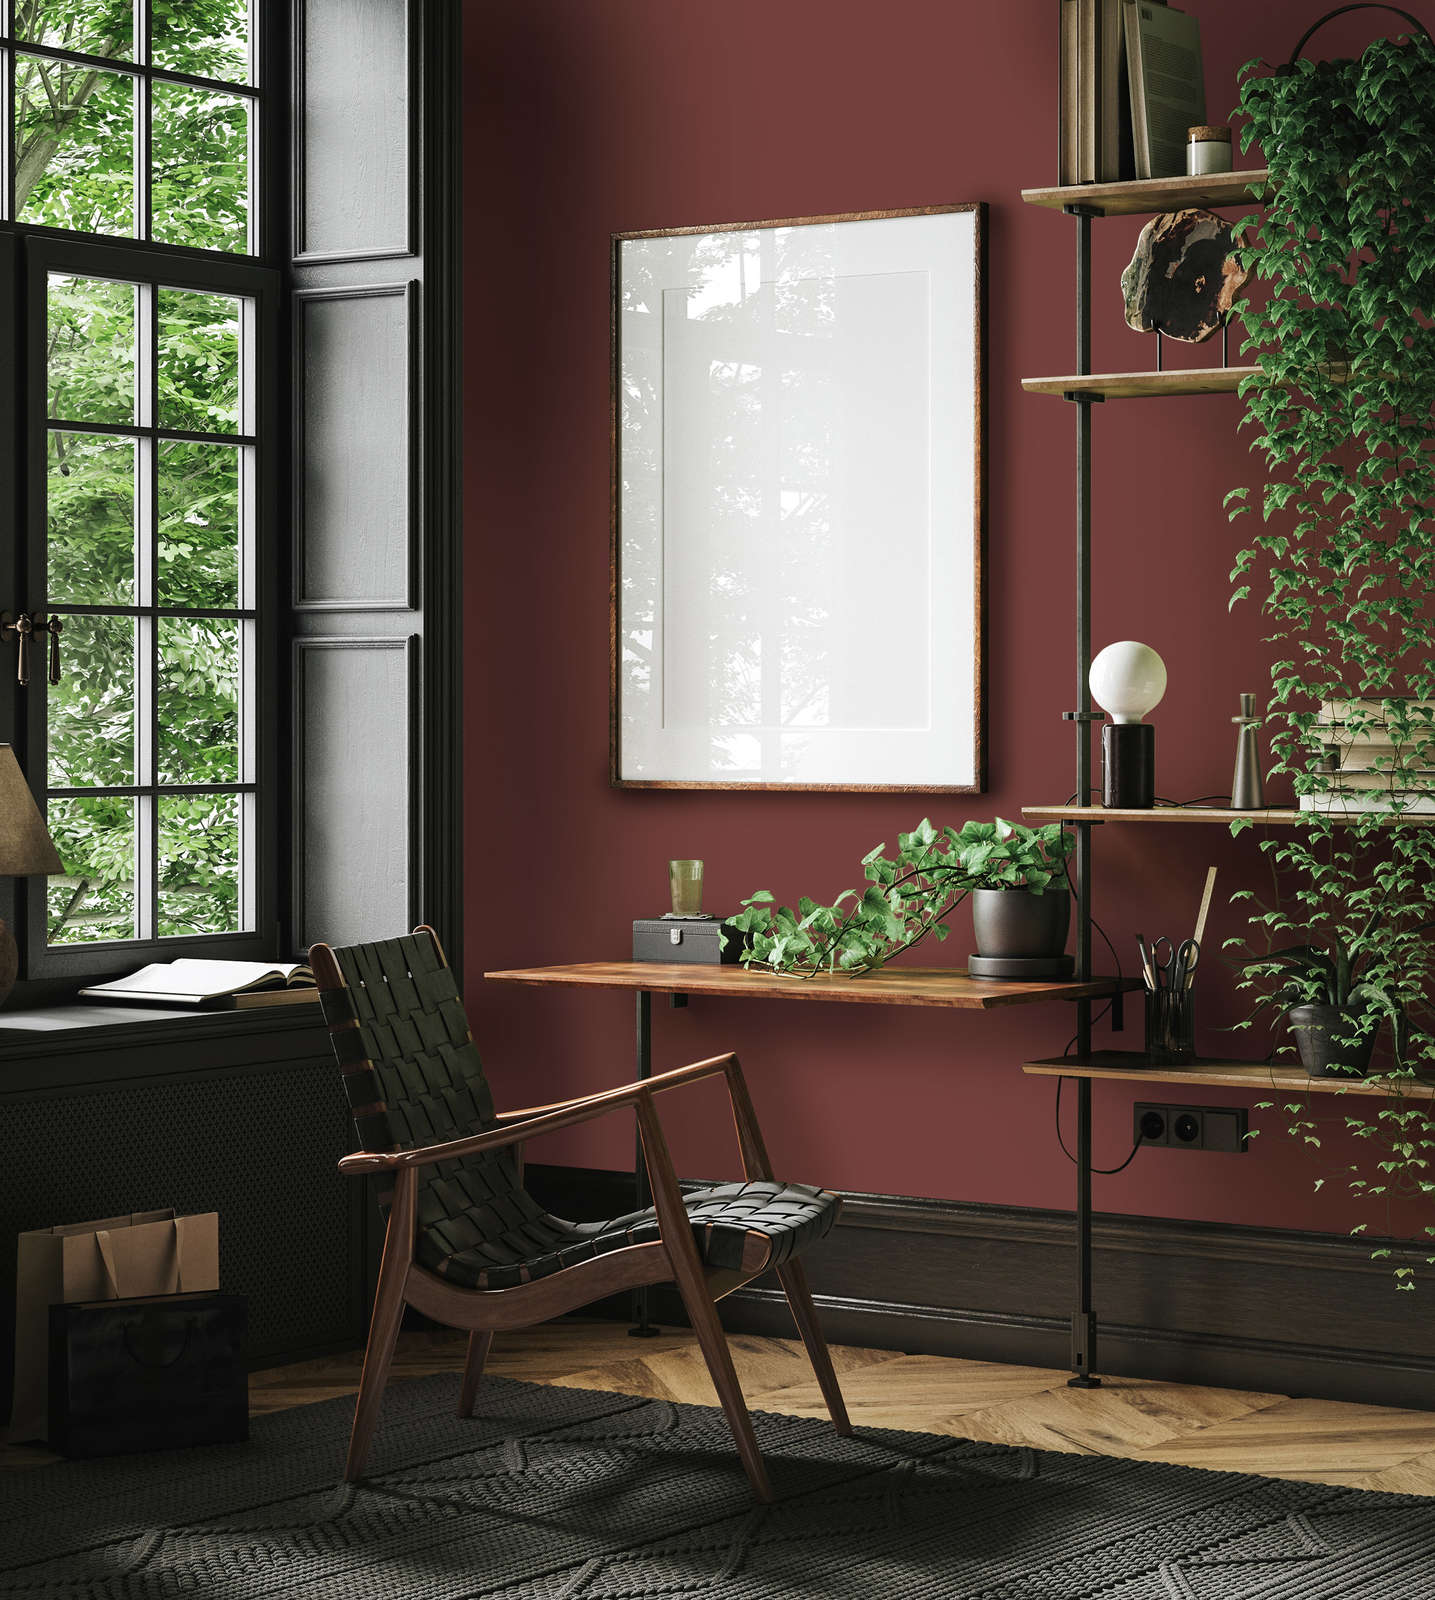             Premium Wall Paint noble chestnut red »Luxury Lipstick« NW1007 – 5 litre
        